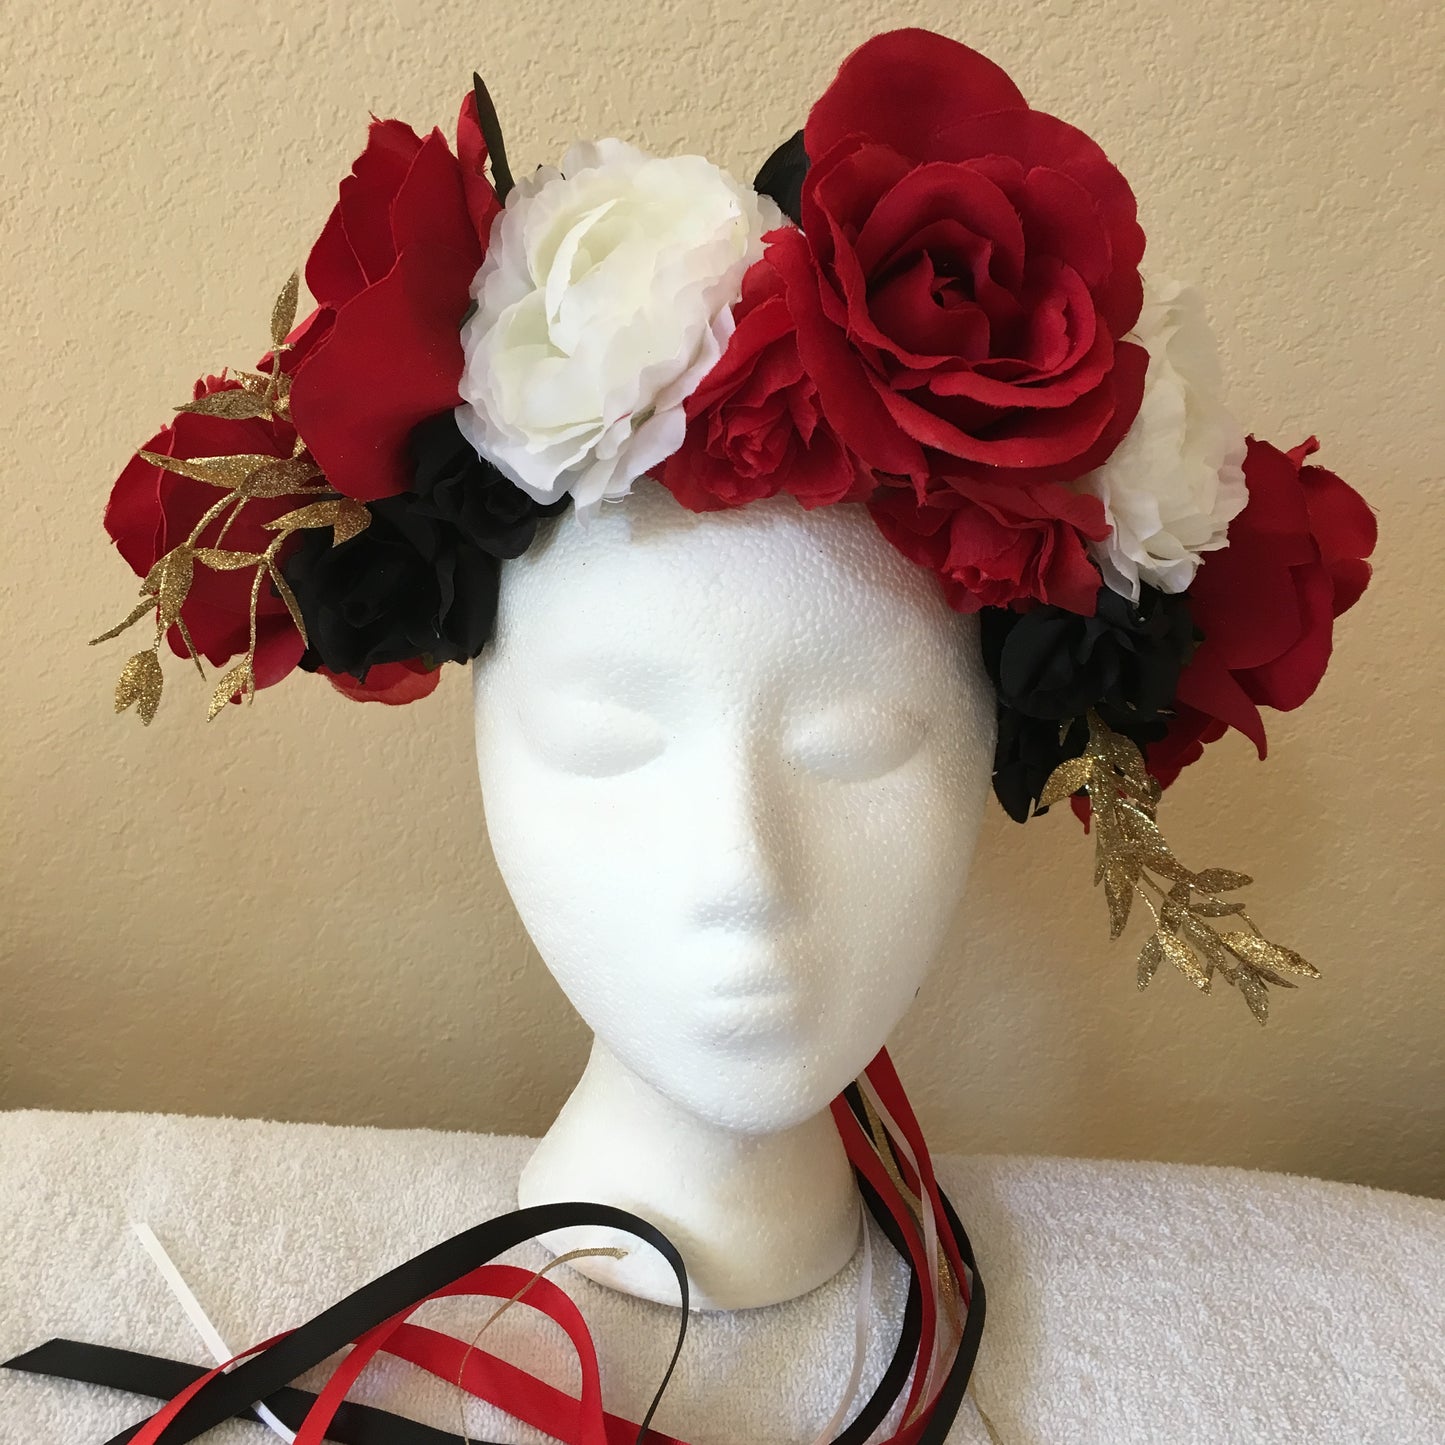 Extra Large Wreath - Black, red & white roses w/ gold accents